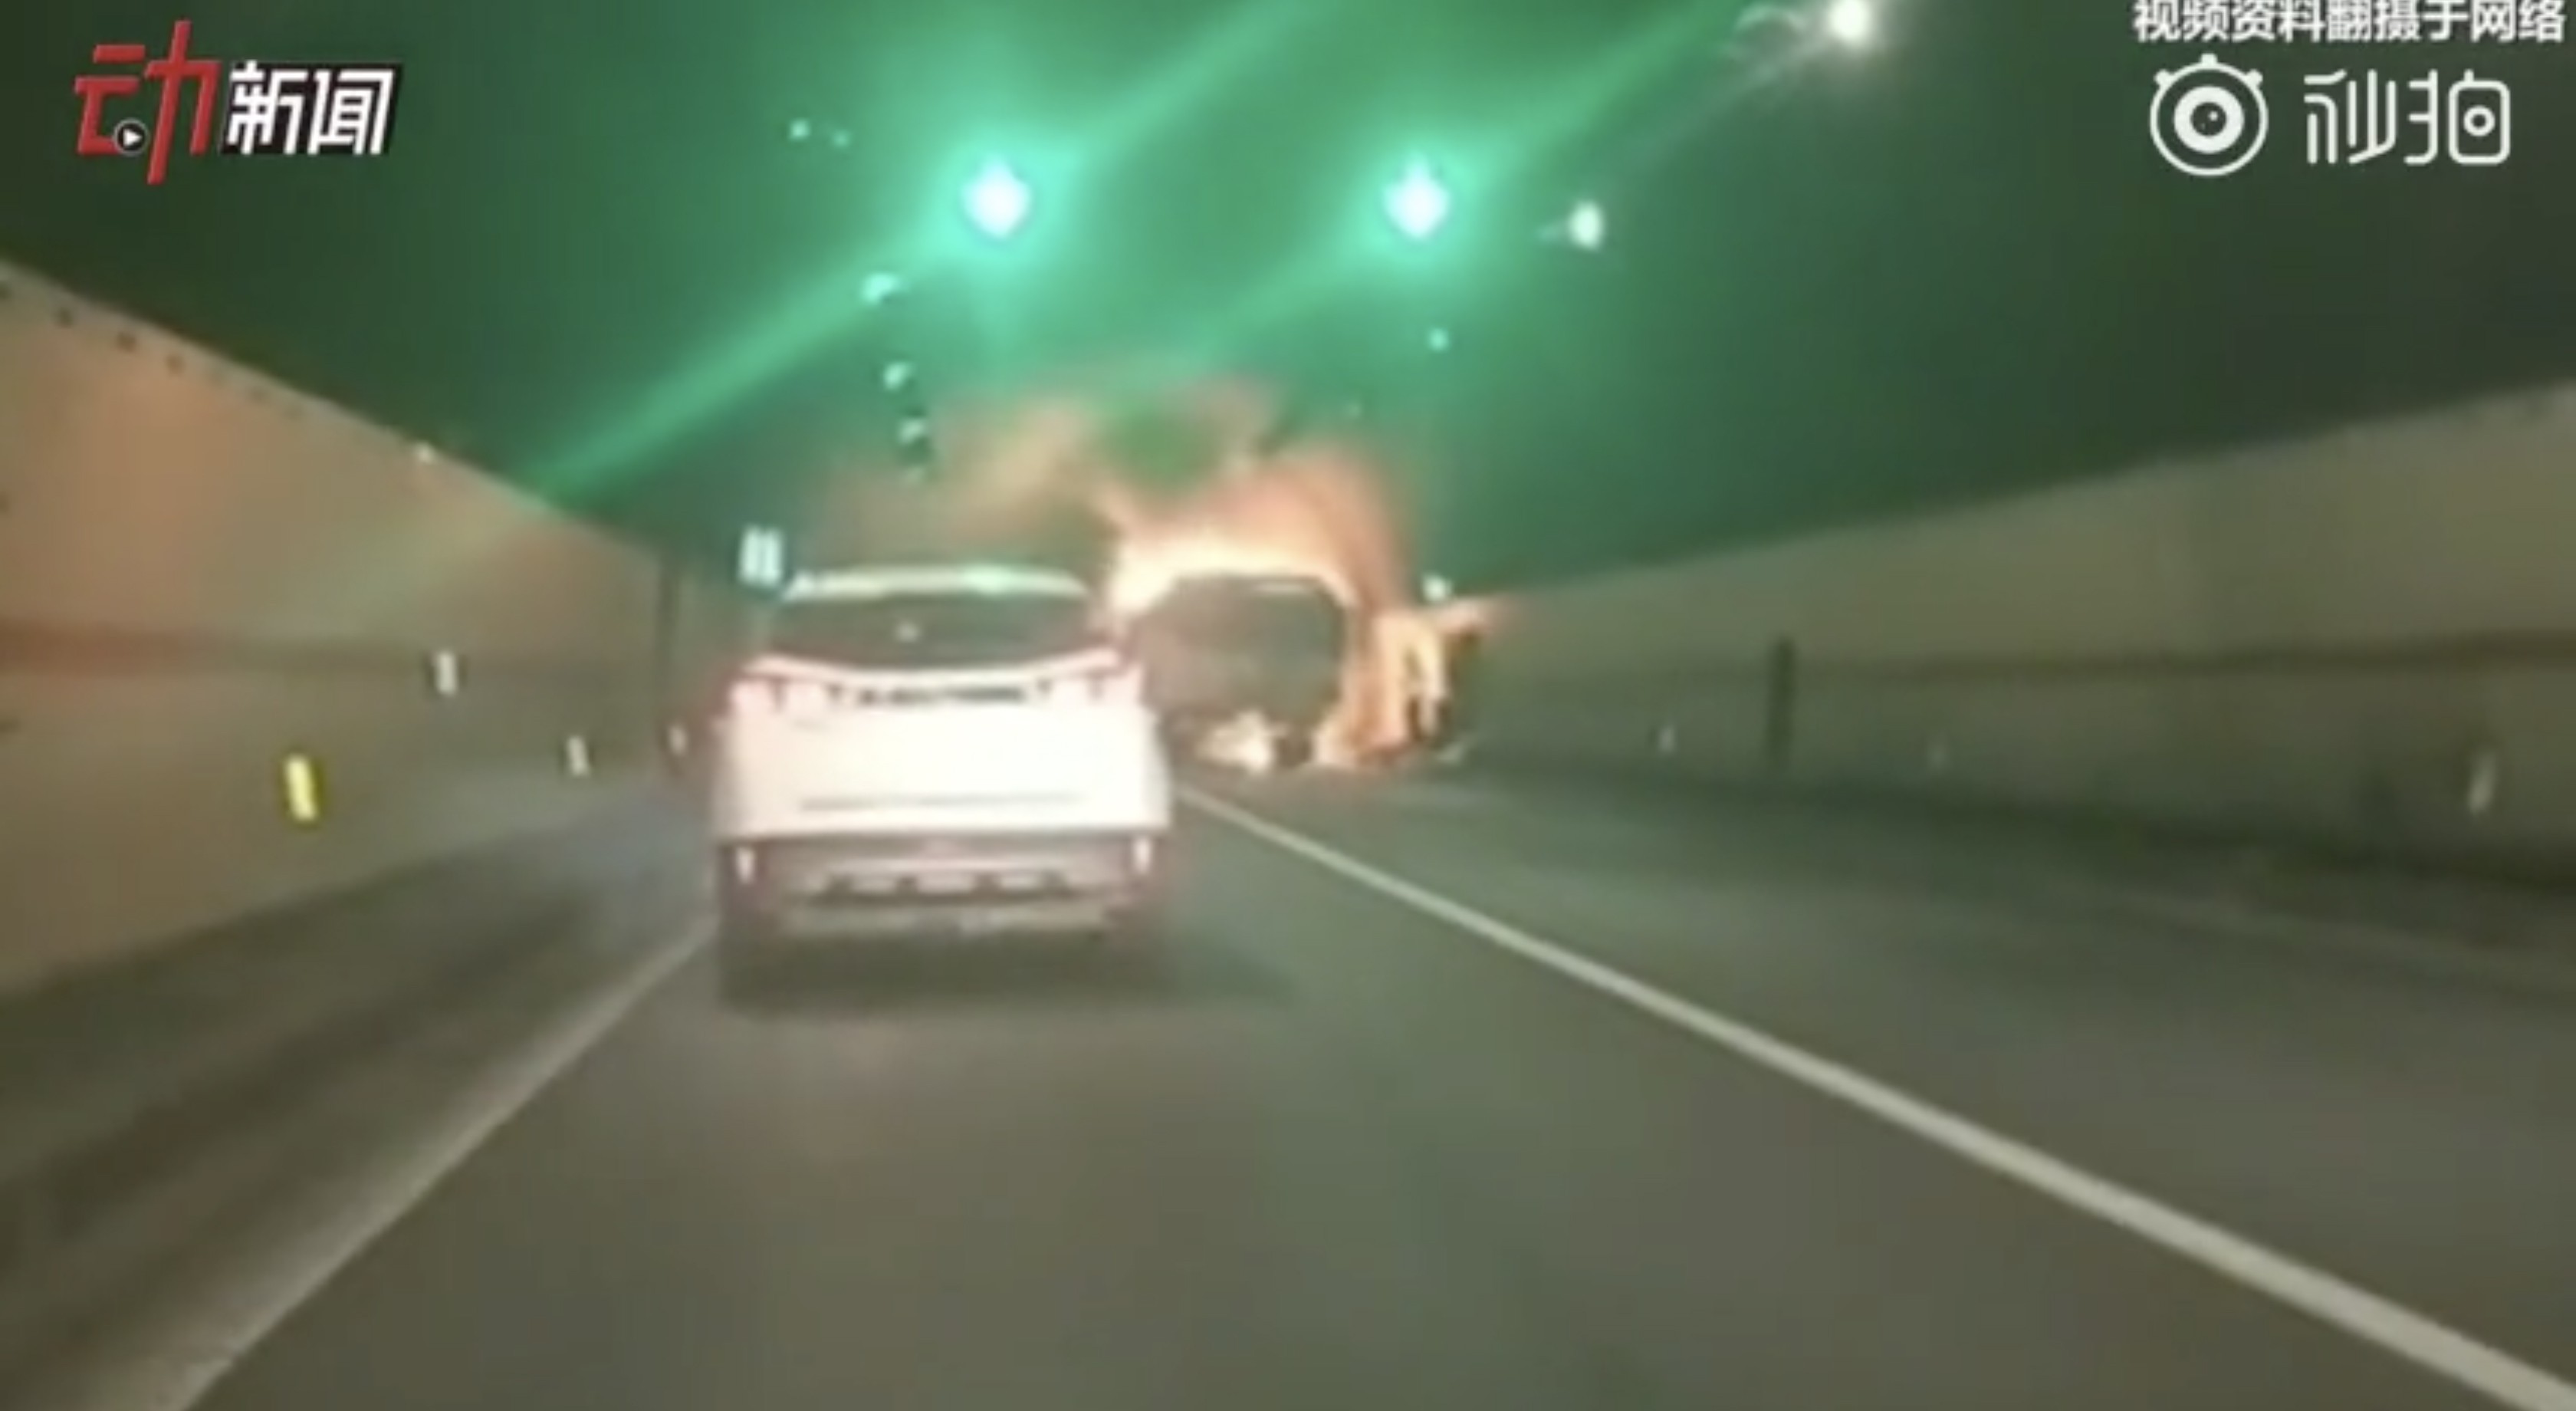 Five people, including a four-year-old boy, were killed and 31 others injured after a truck caught fire in a motorway tunnel in Zhejiang province. Photo: Miaopai